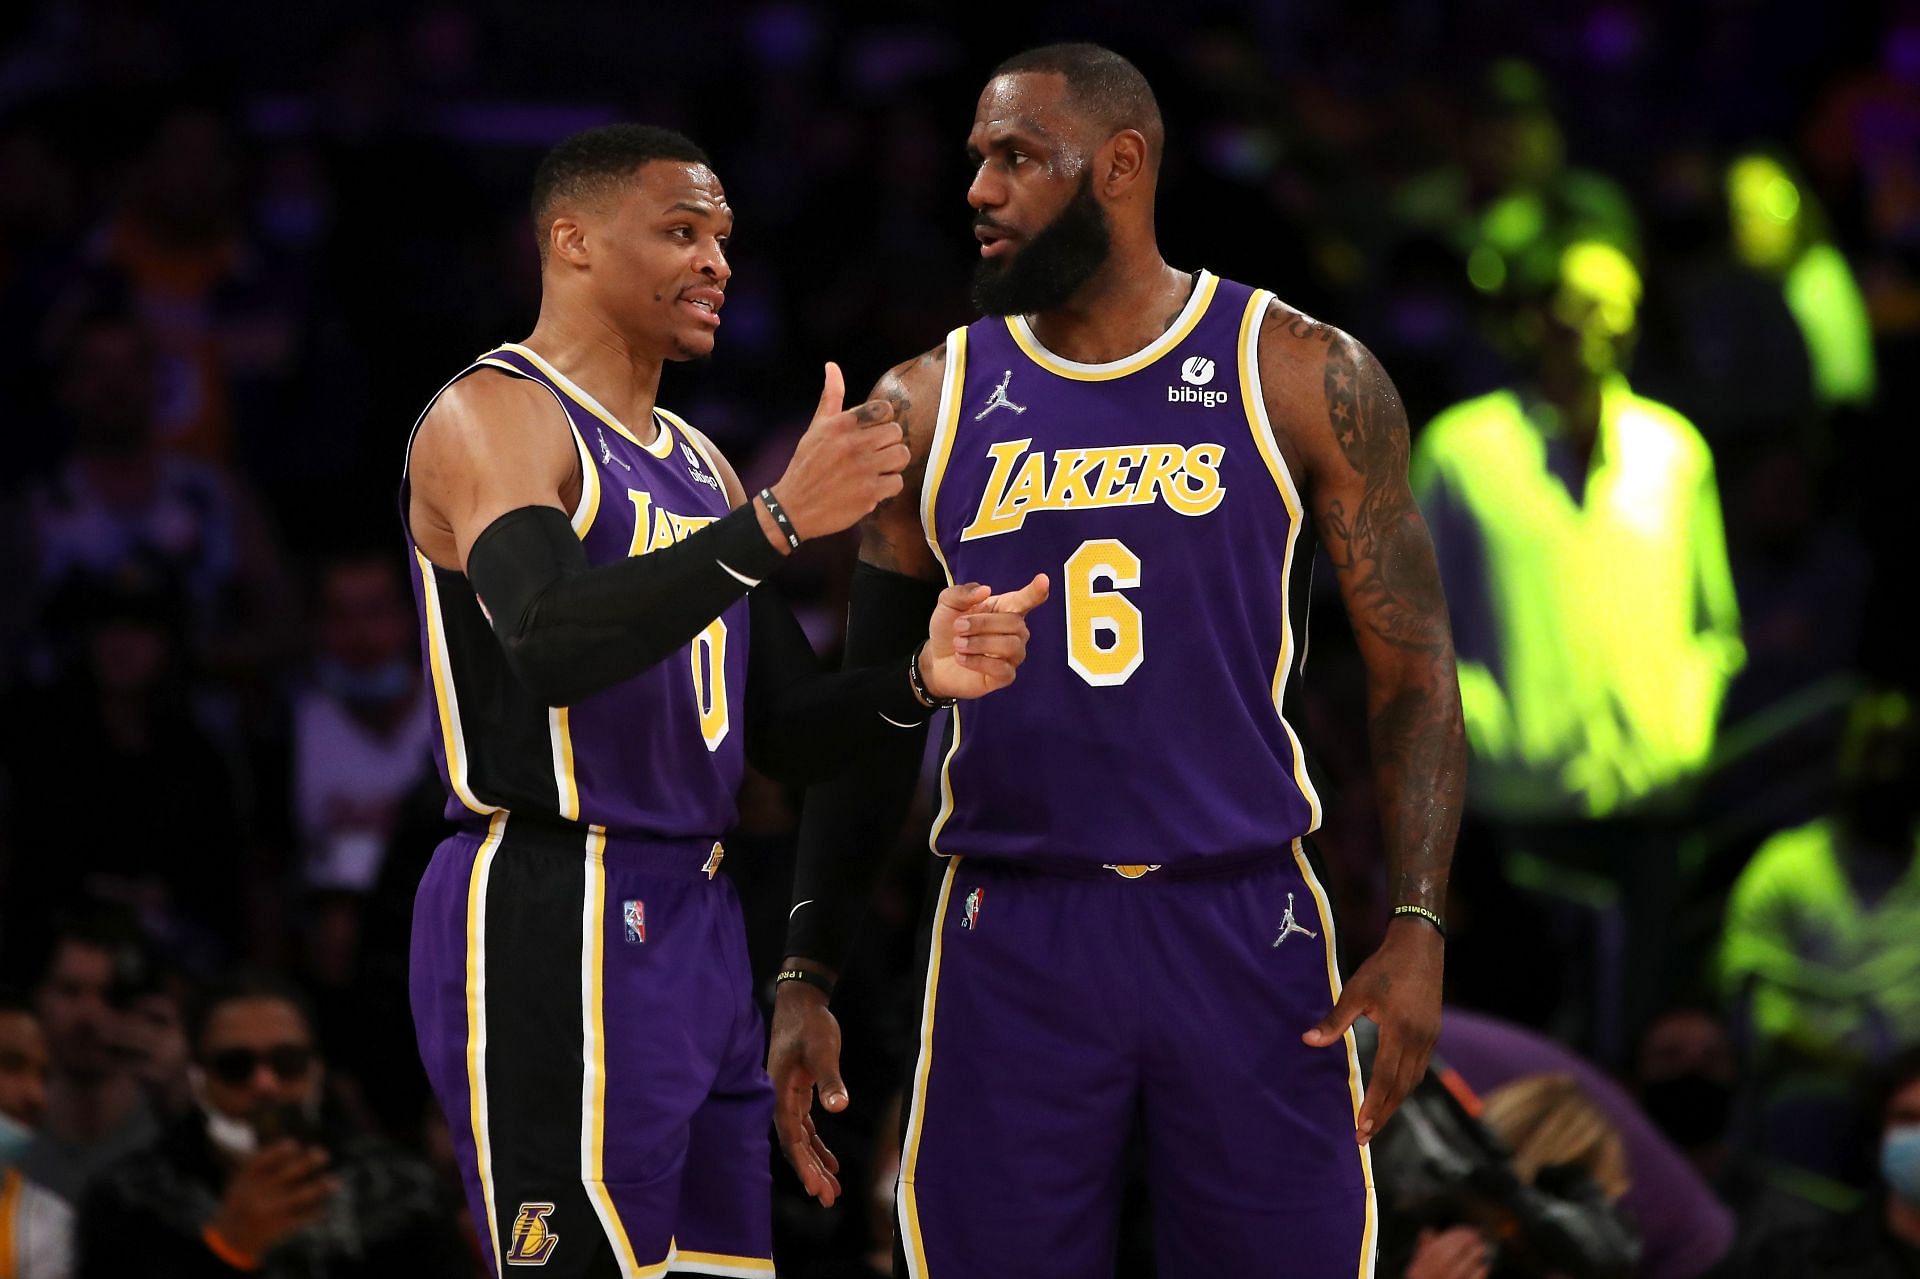 Russell Westbrook and LeBron James in action during Utah Jazz v Los Angeles Lakers